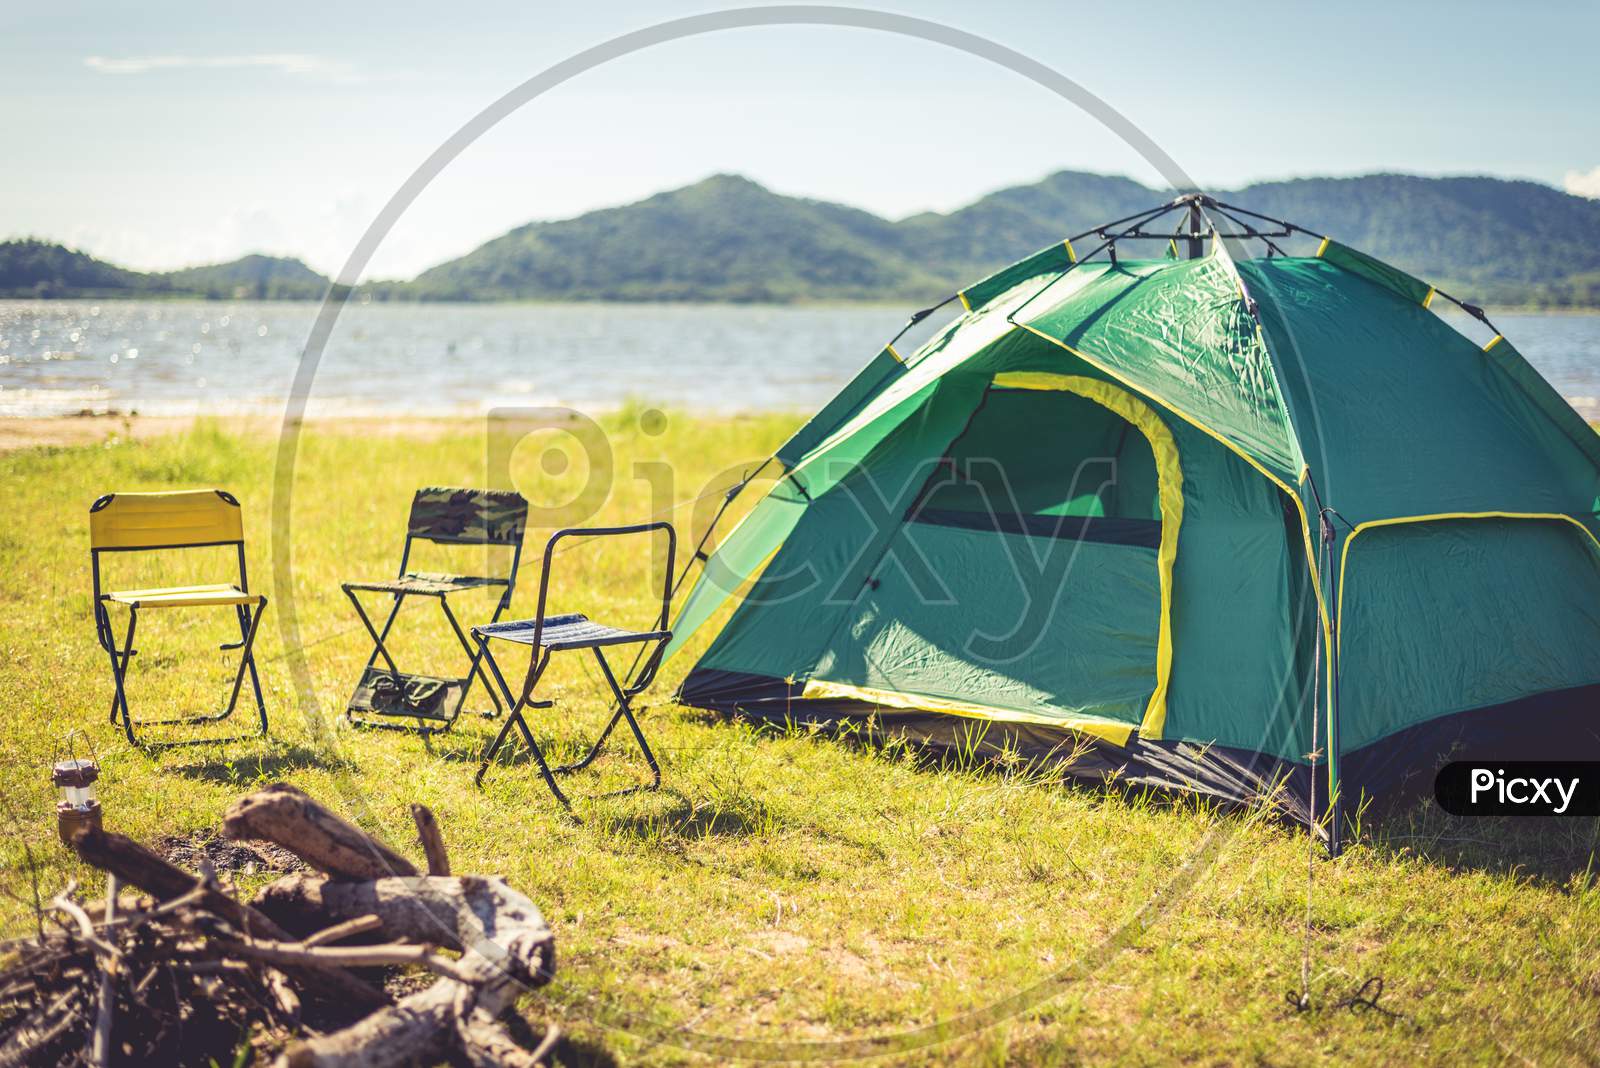 Camping Tent With Extinguished Bonfire In The Green Field Meadow, Lake And Mountain Background. Picnic And Travel Concept. Nature Theme.